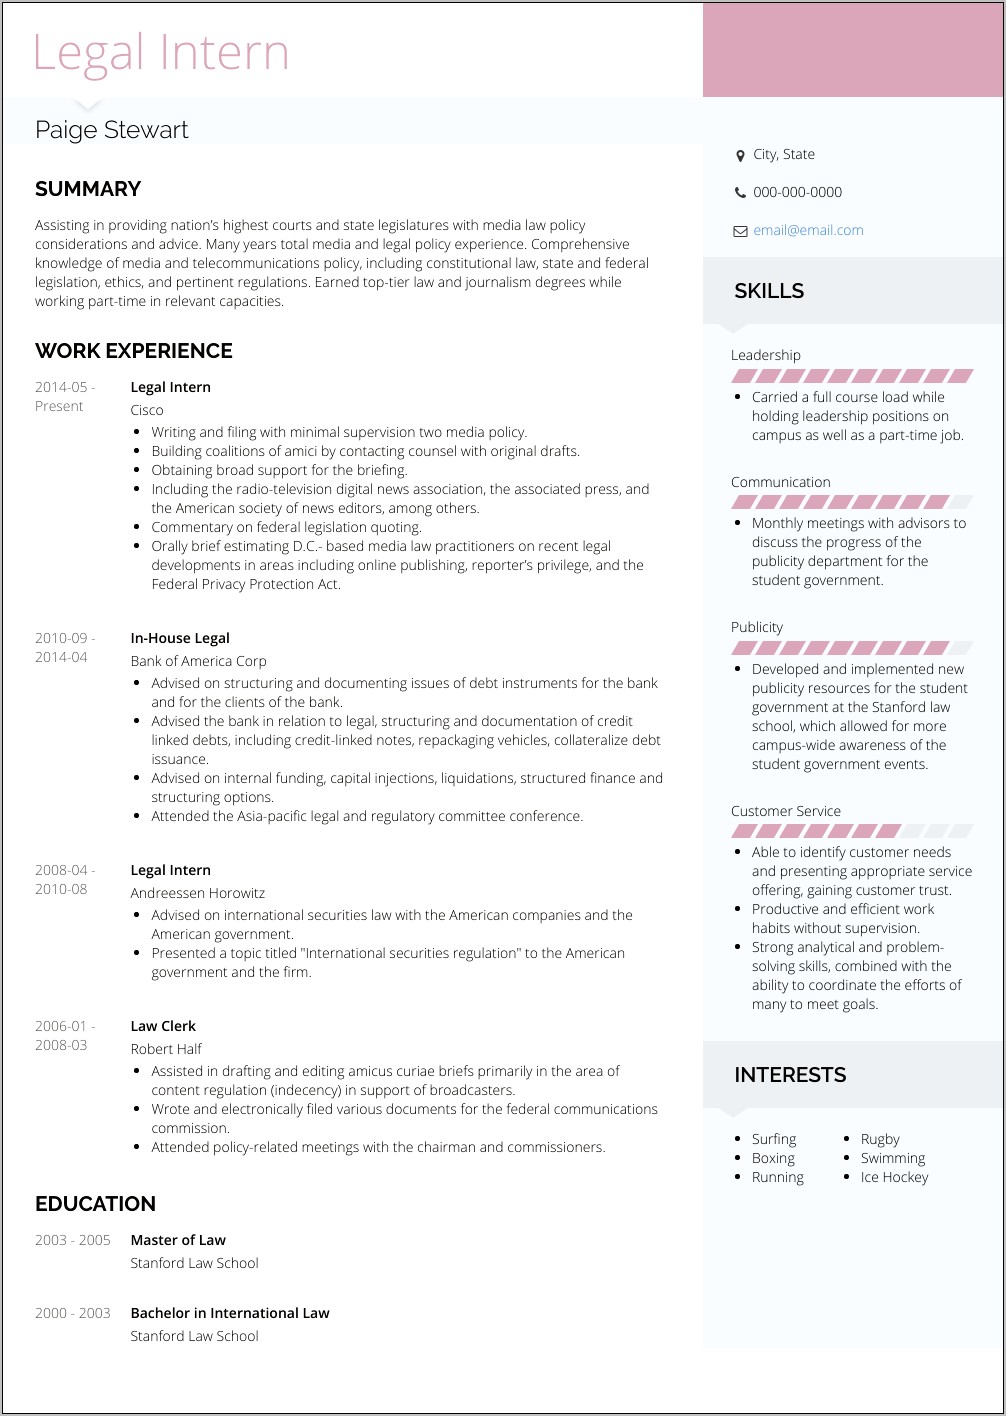 Resume Objectives For Legal Position